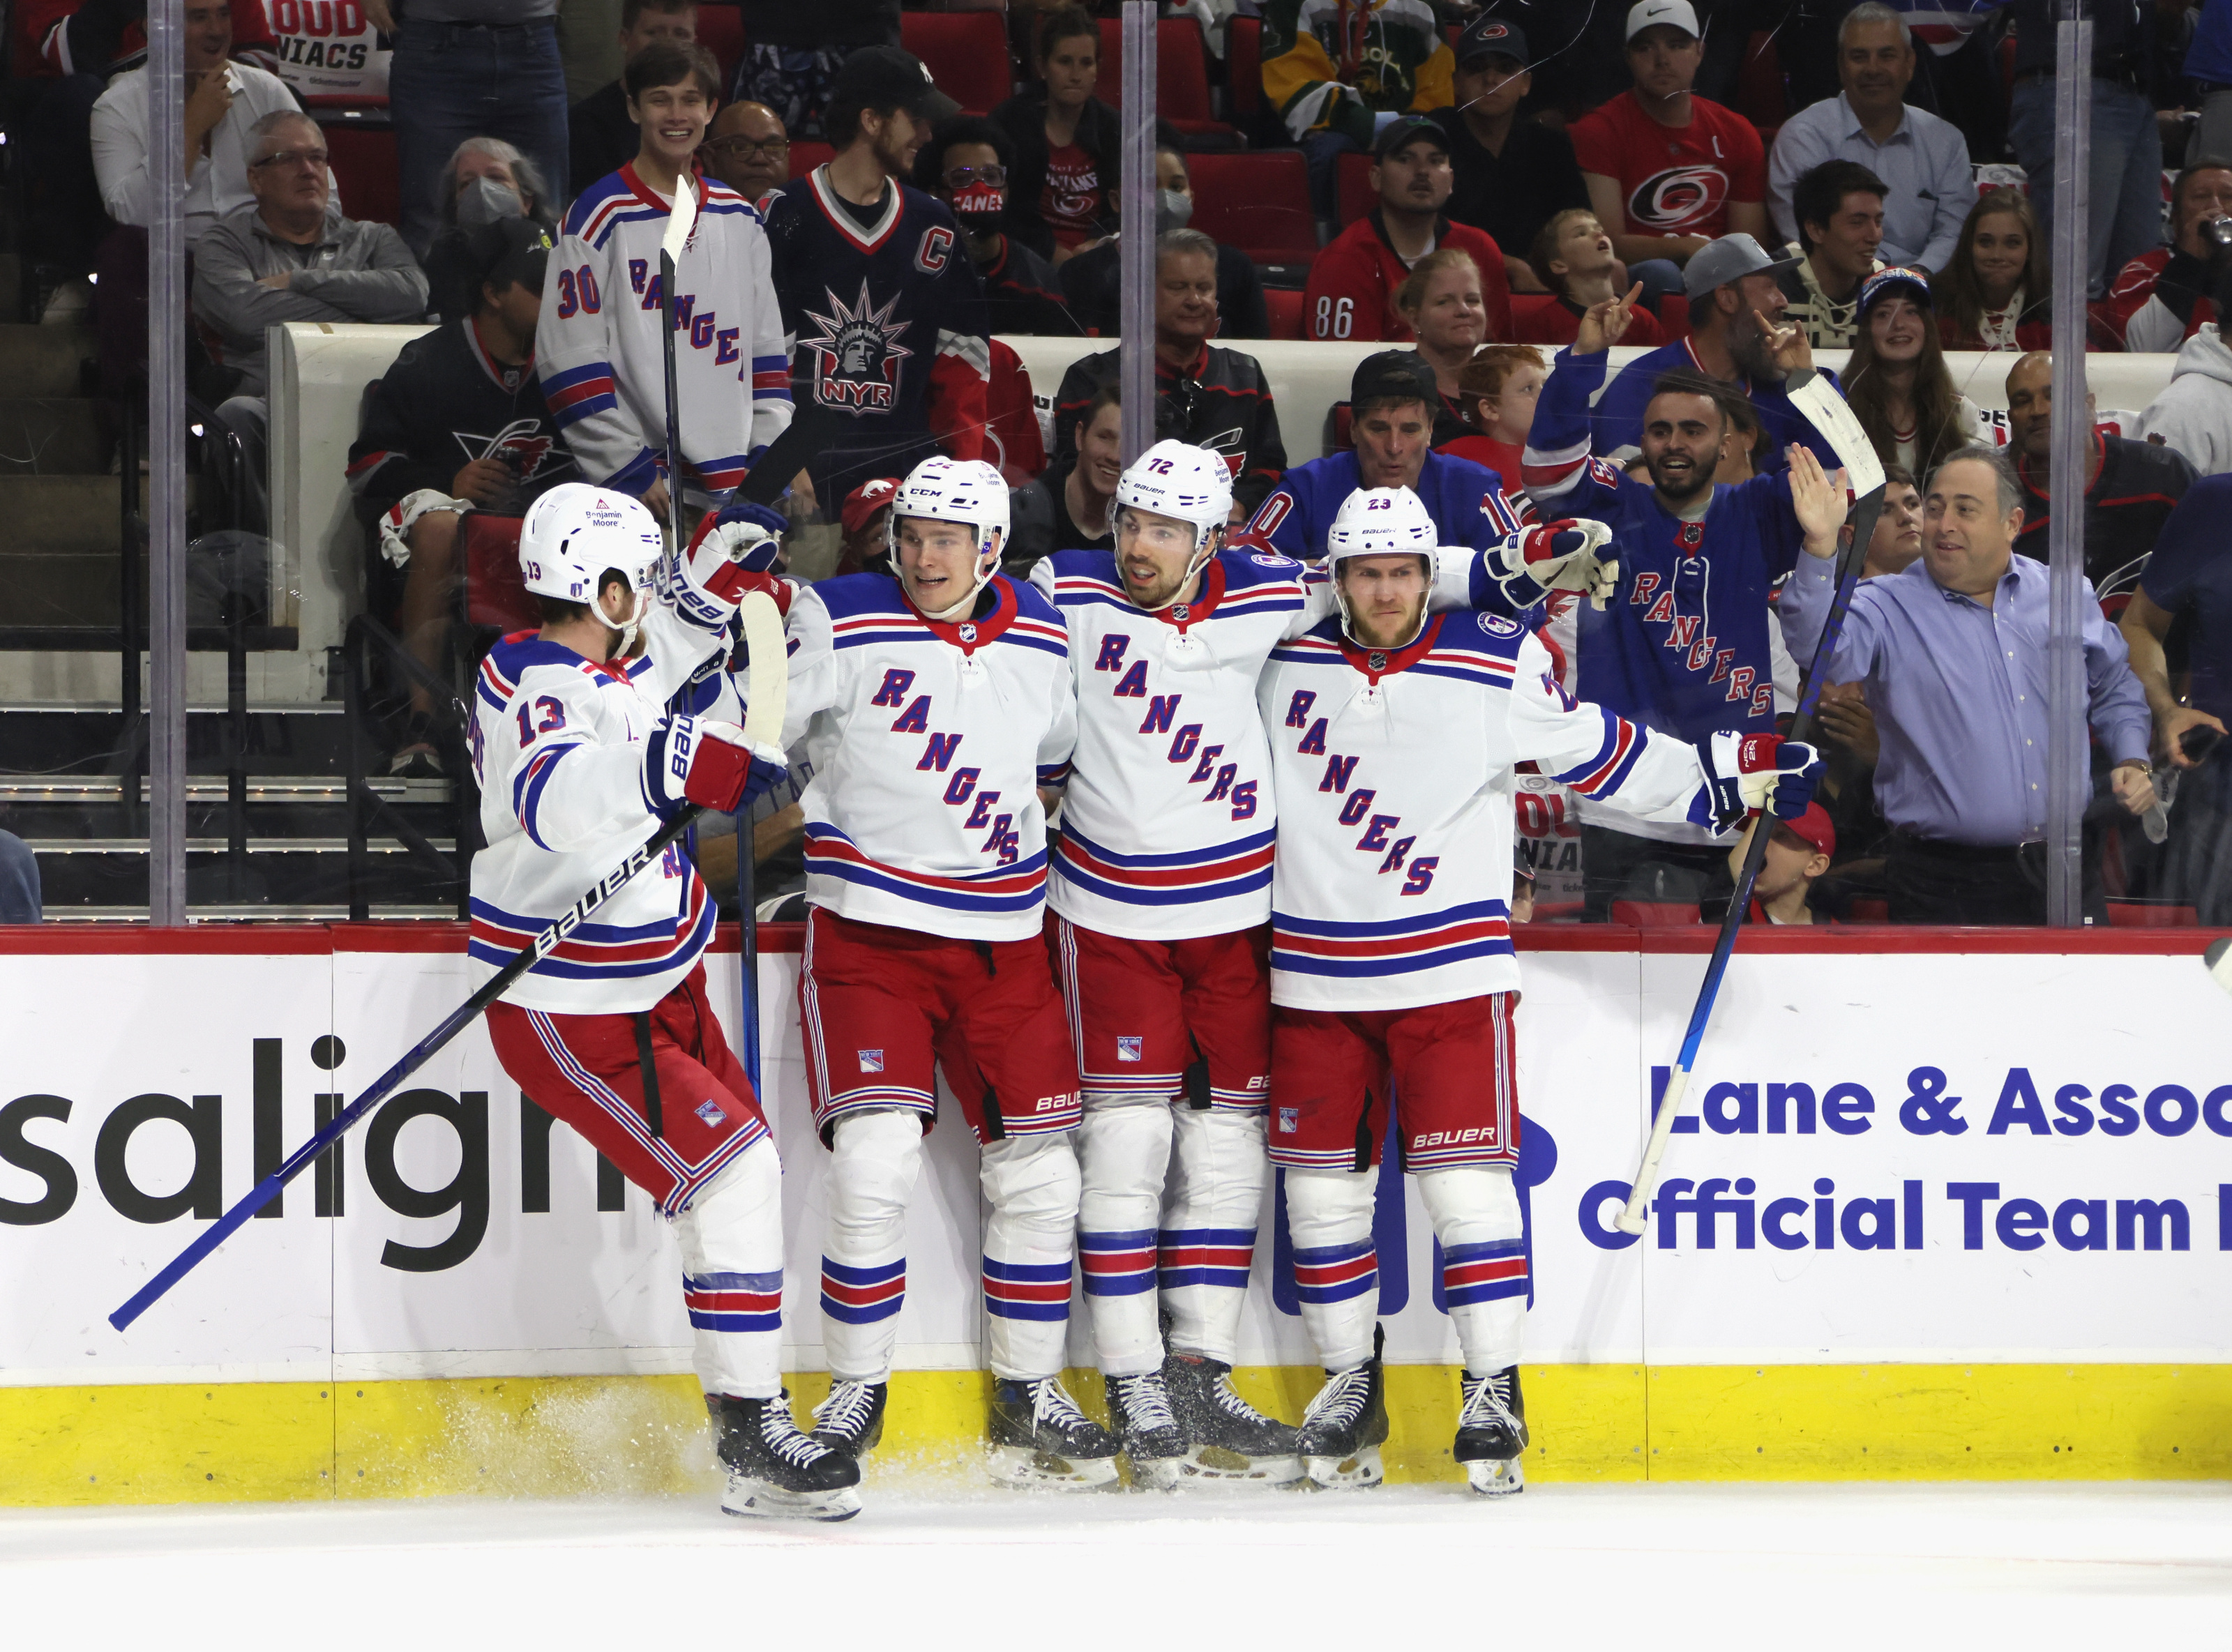 How the Kids became the Rangers' Best Line